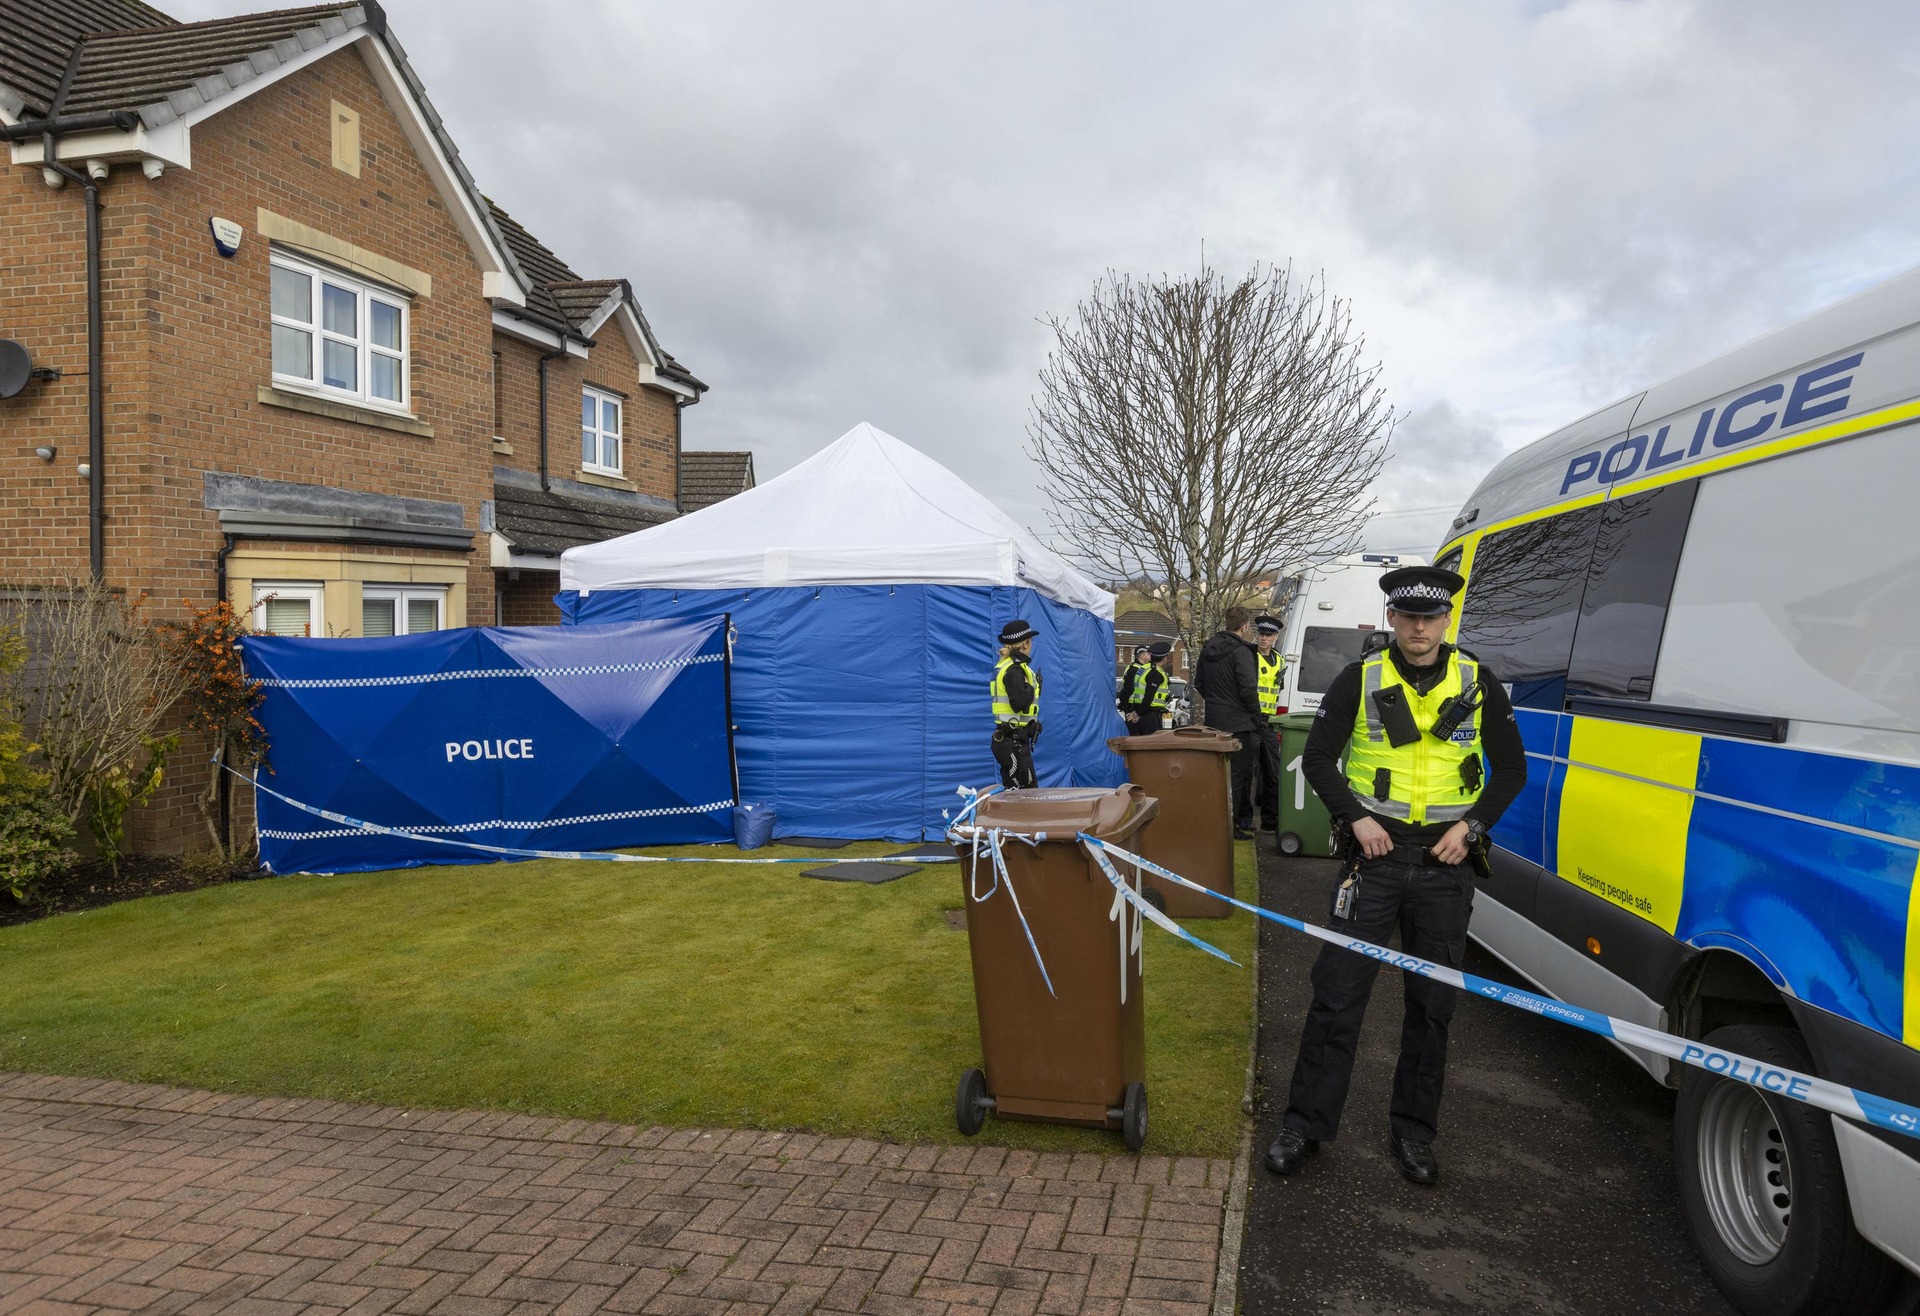 Police officers investigating the SNP’s finances searched the home shared by Nicola Sturgeon and her husband, former SNP chief executive Peter Murrell.